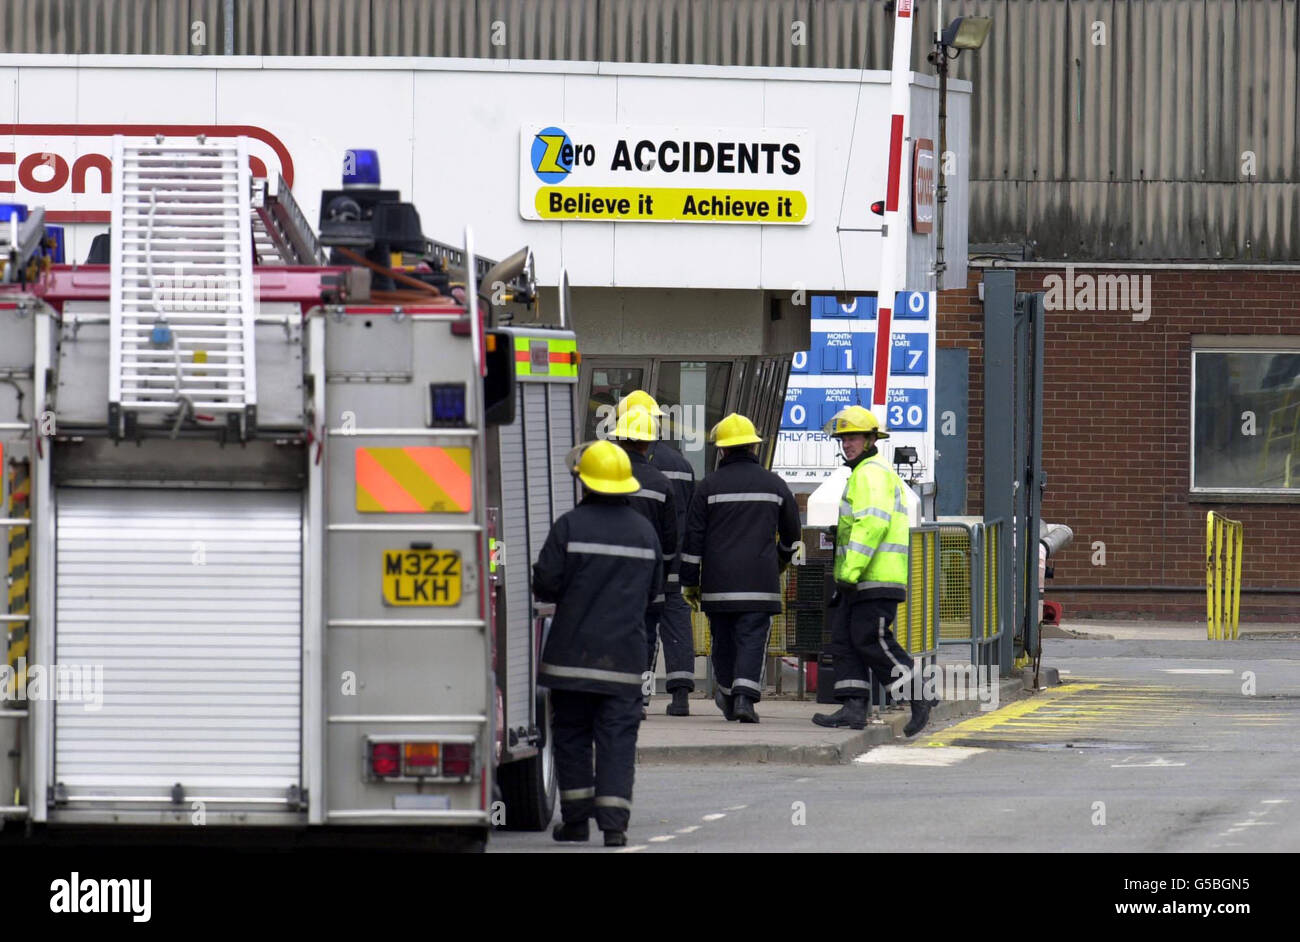 Emergency crews at Conoco's oil refinery at South Killingholme, near Immingham, north Lincolnshire, after two people were hurt in a huge blast that ripped through the refinery. * The blast sent tremors through the surrounding area and flames and smoke could be seen leaping into the sky. At one point Lincolnshire Ambulance Service reported that four workers were unaccounted for, but a spokesman said later that they all had been traced. Stock Photo